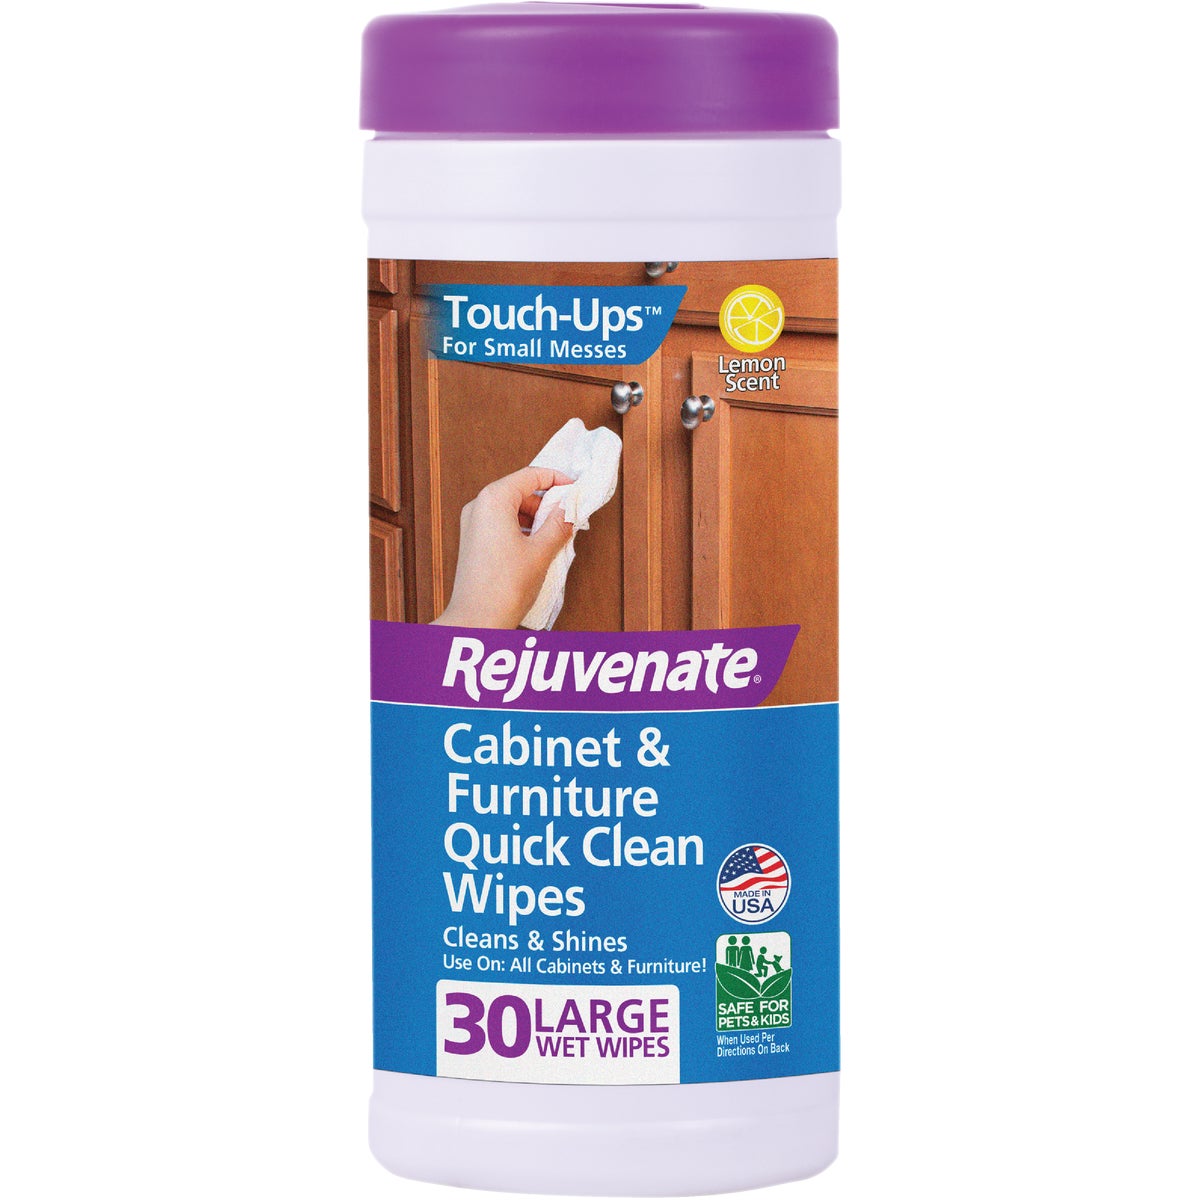 Rejuvenate Touch-Ups Cabinet & Furniture Quick Clean Wipes (30-Count)